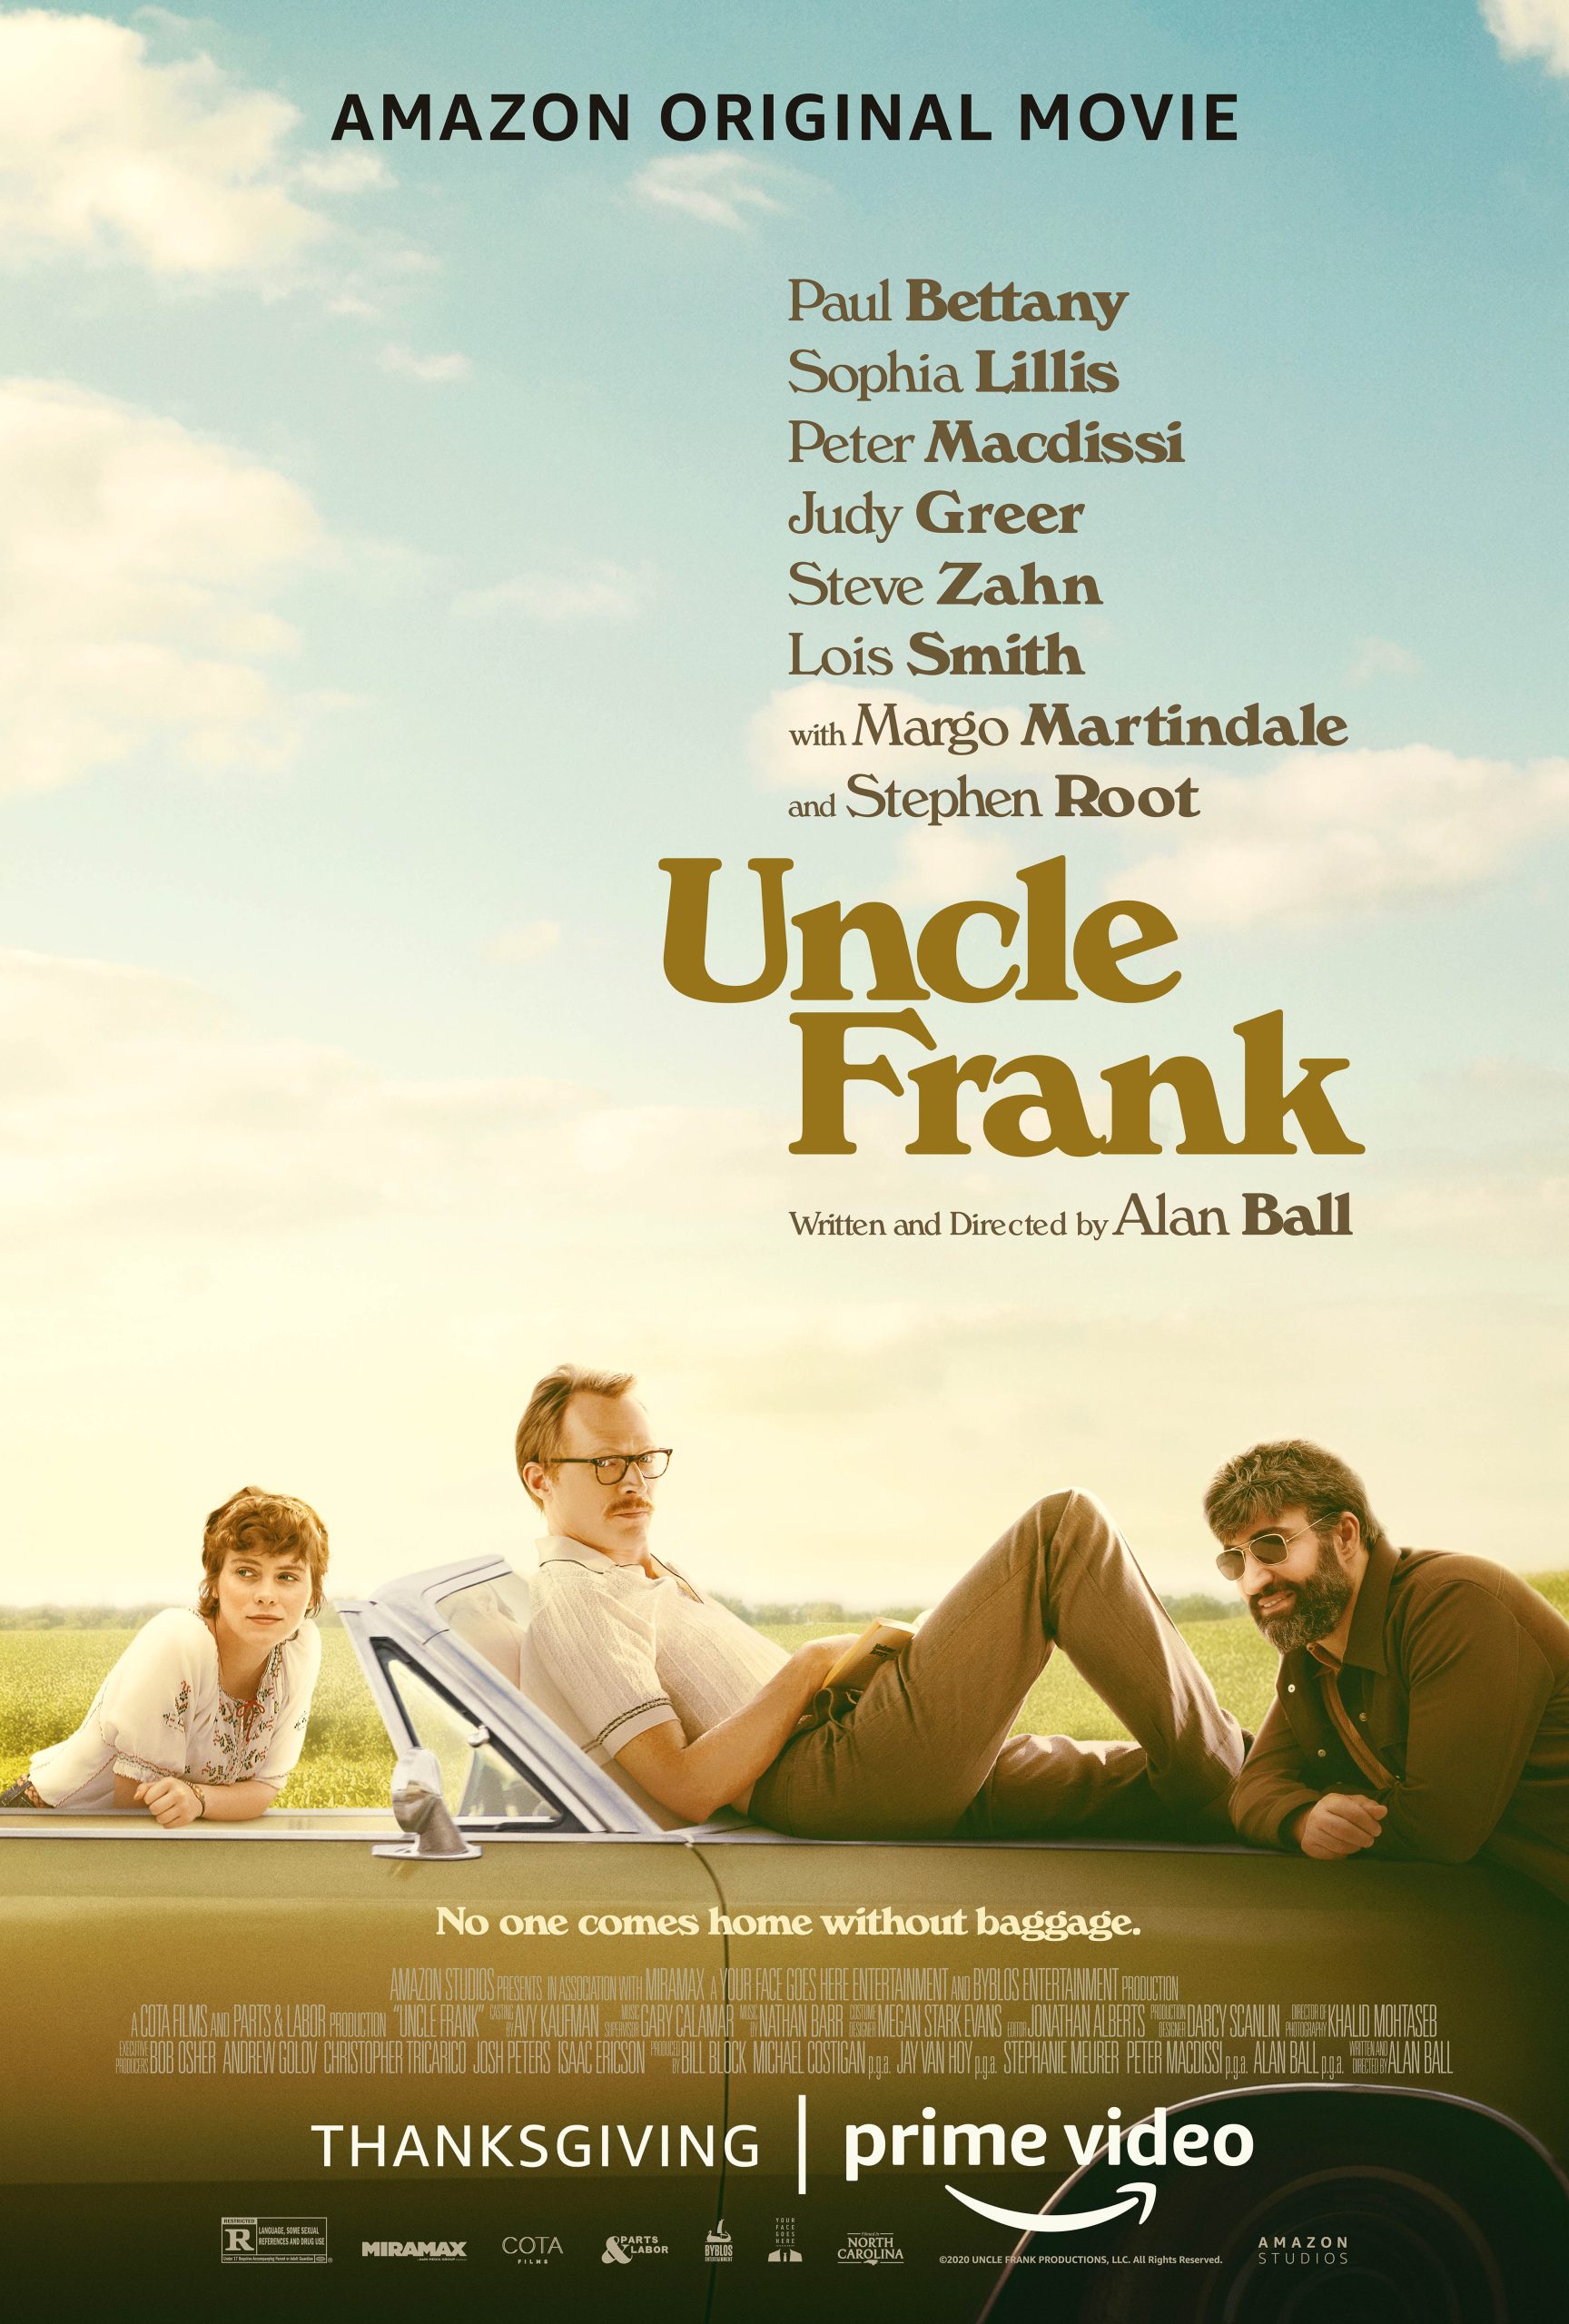 Uncle Frank (2020) Paul Bettany